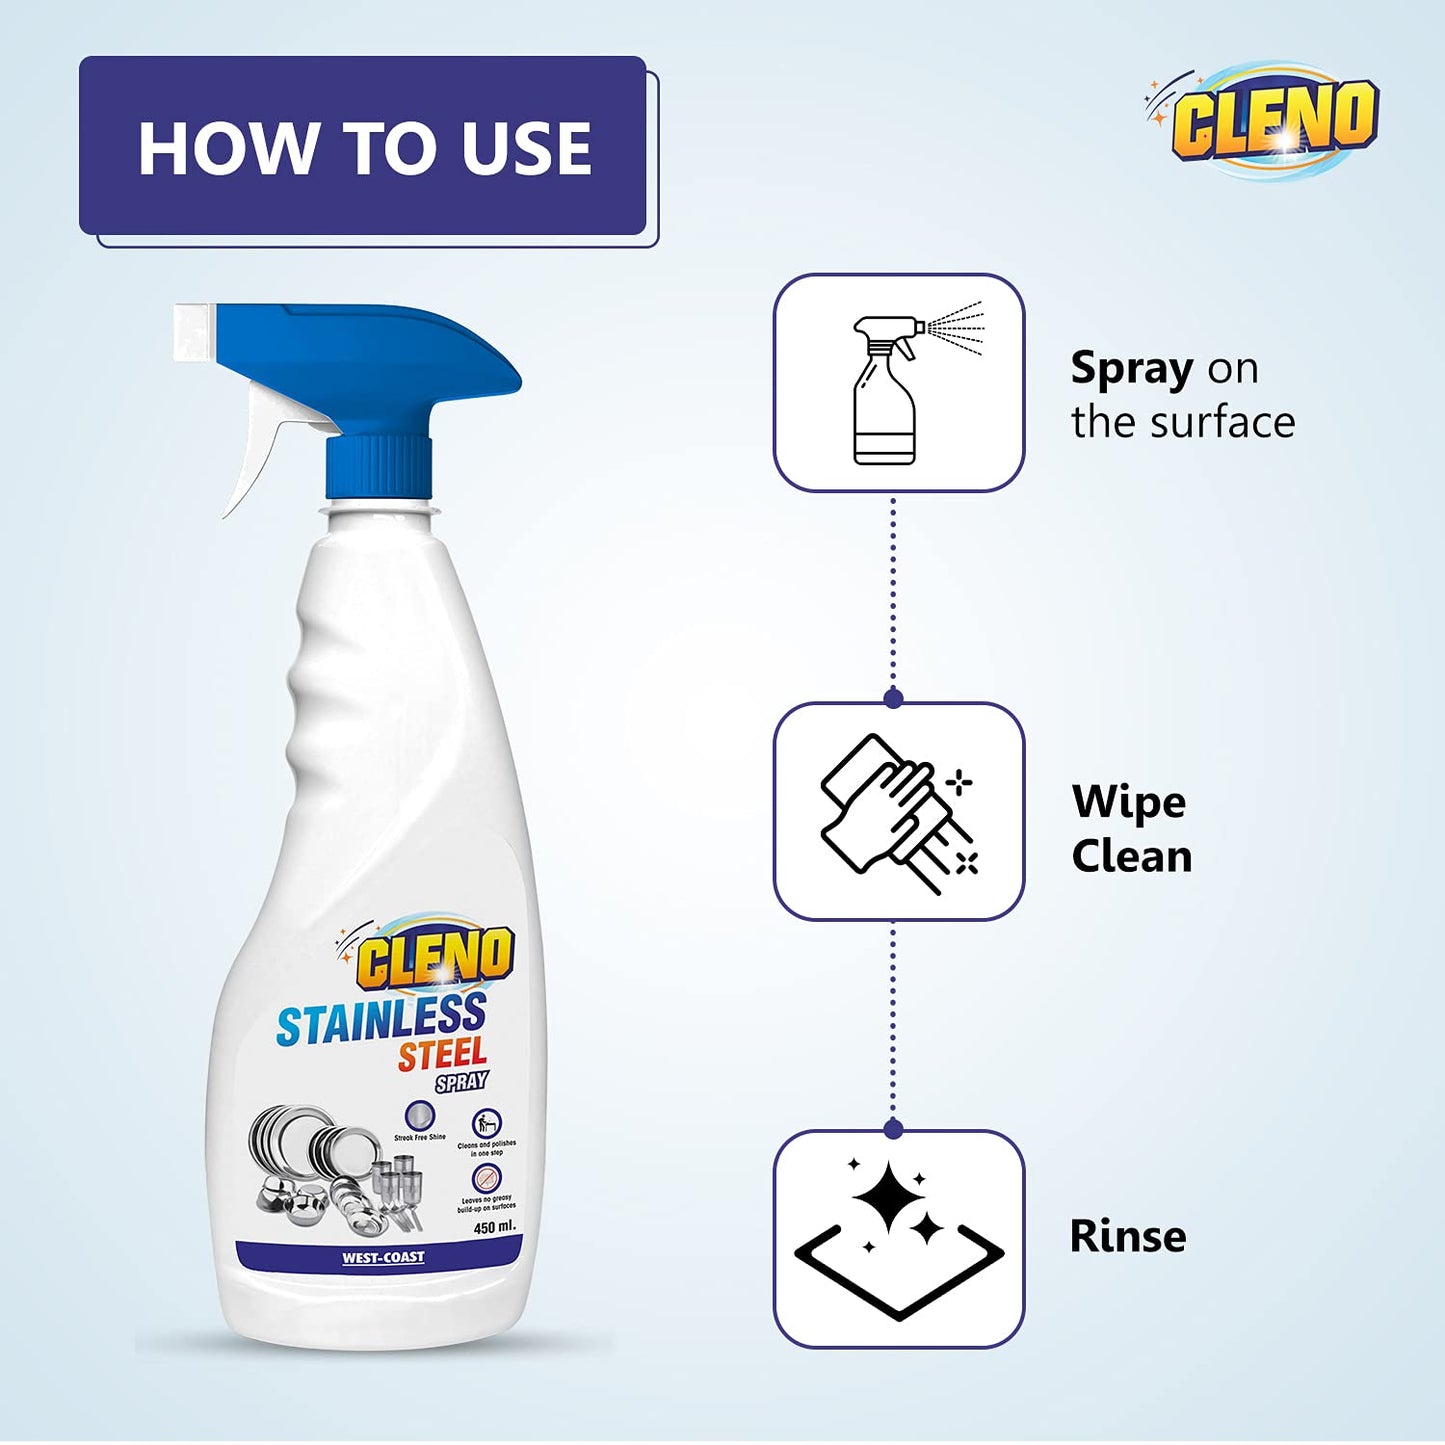 Cleno Stainless Steel Cleaner Spray Cleans Stainless Steel SurfacesStainless Steel BottleKitchen Stainless Steel AppliancesCountertops- 450ml Pack of 5 Ready to Use